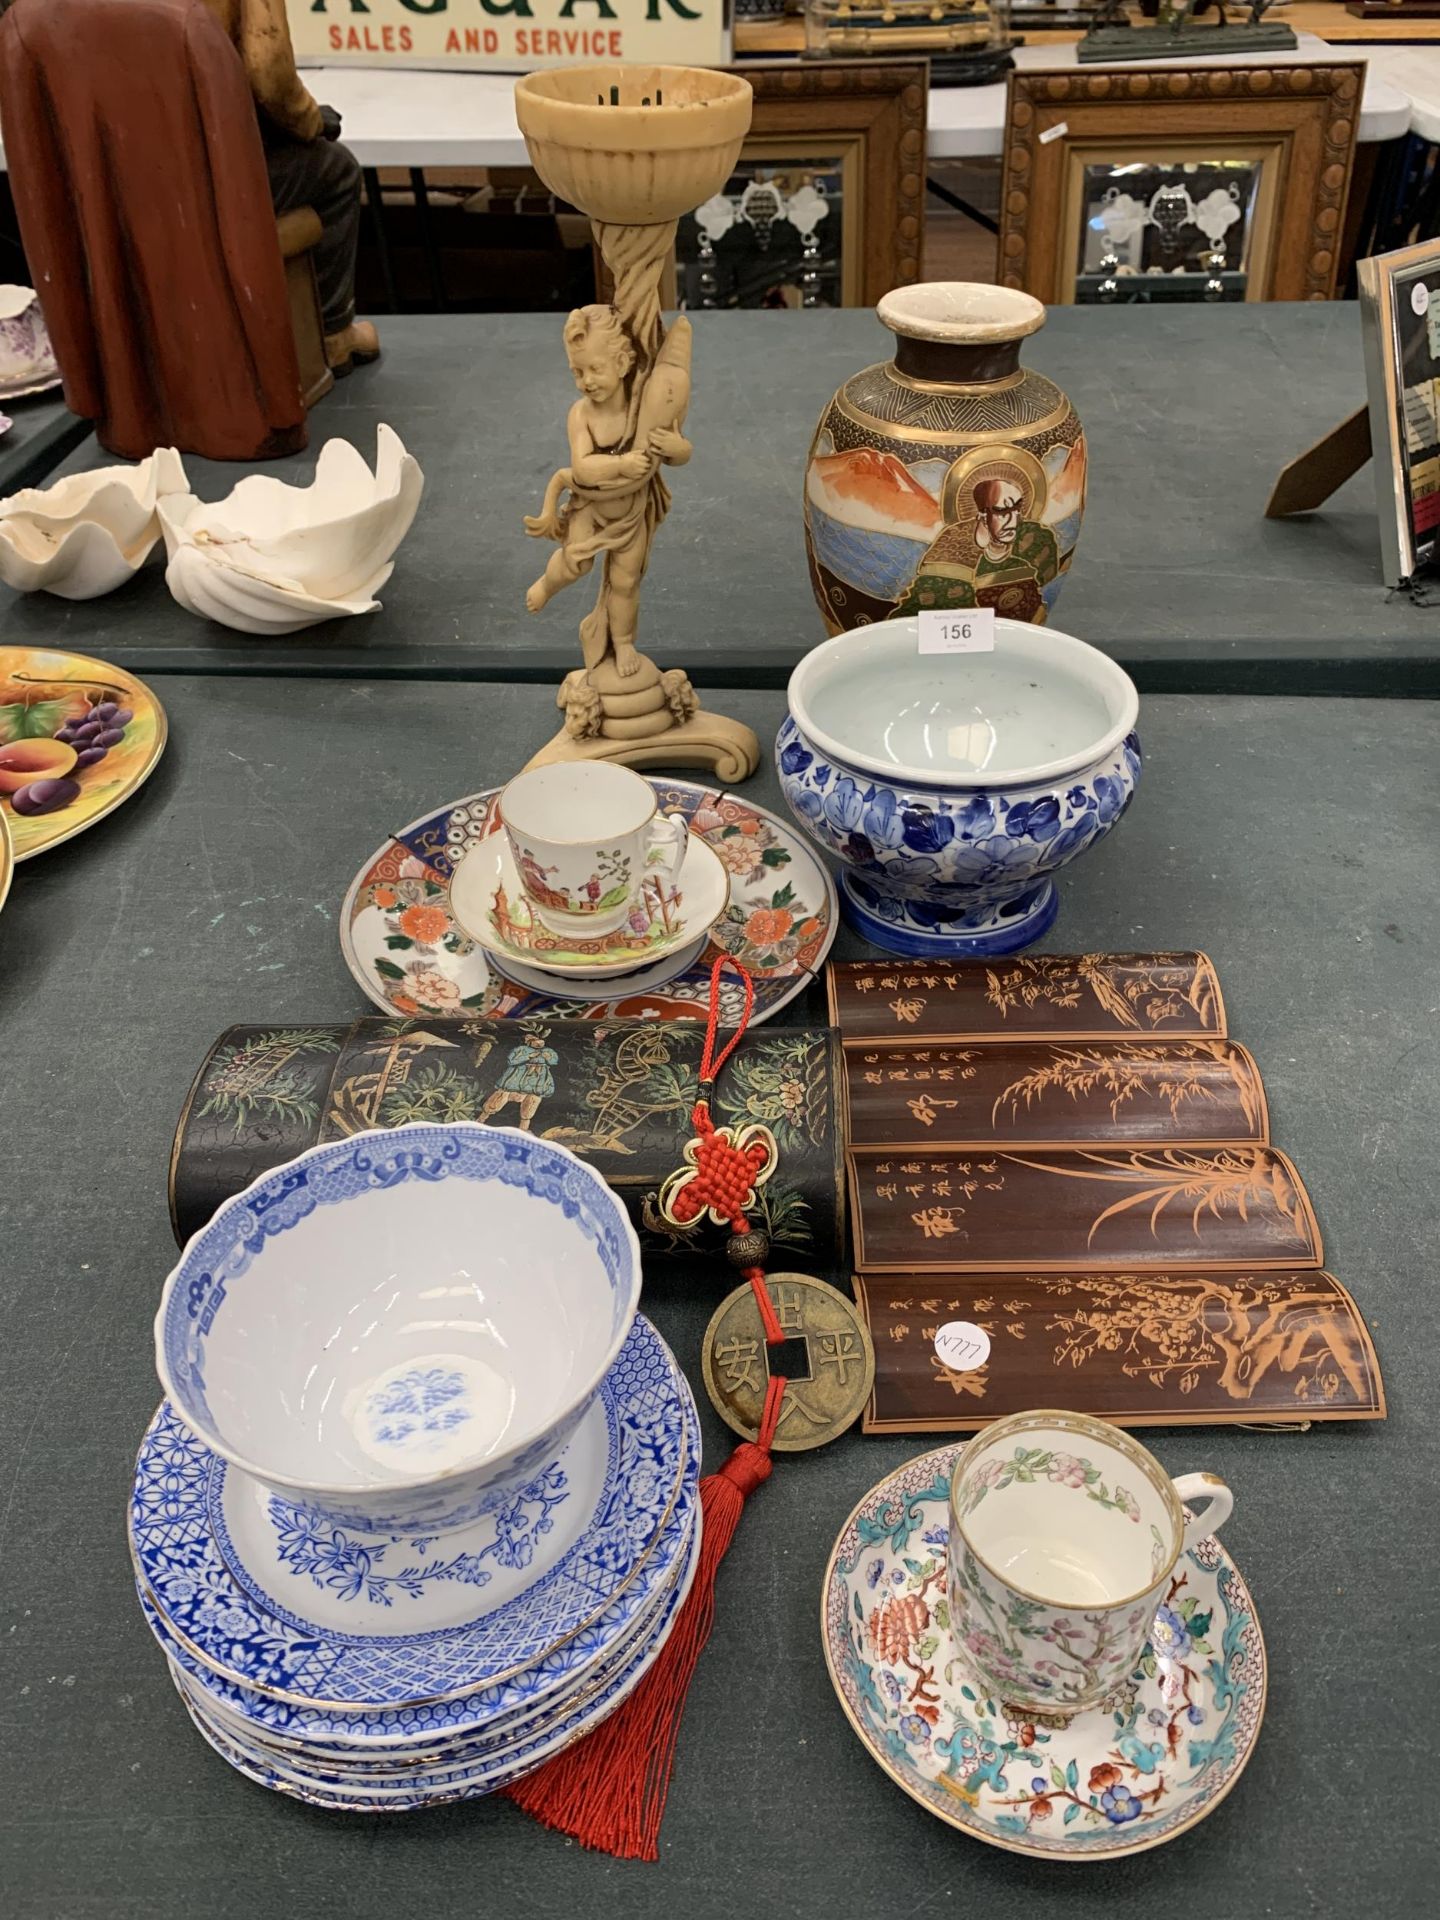 A COLLECTION OF ORIENTAL ITEMS TO INCLUDE A VASE, BOWLS AND PLATES, CUPS AND SAUCERS, A METAL